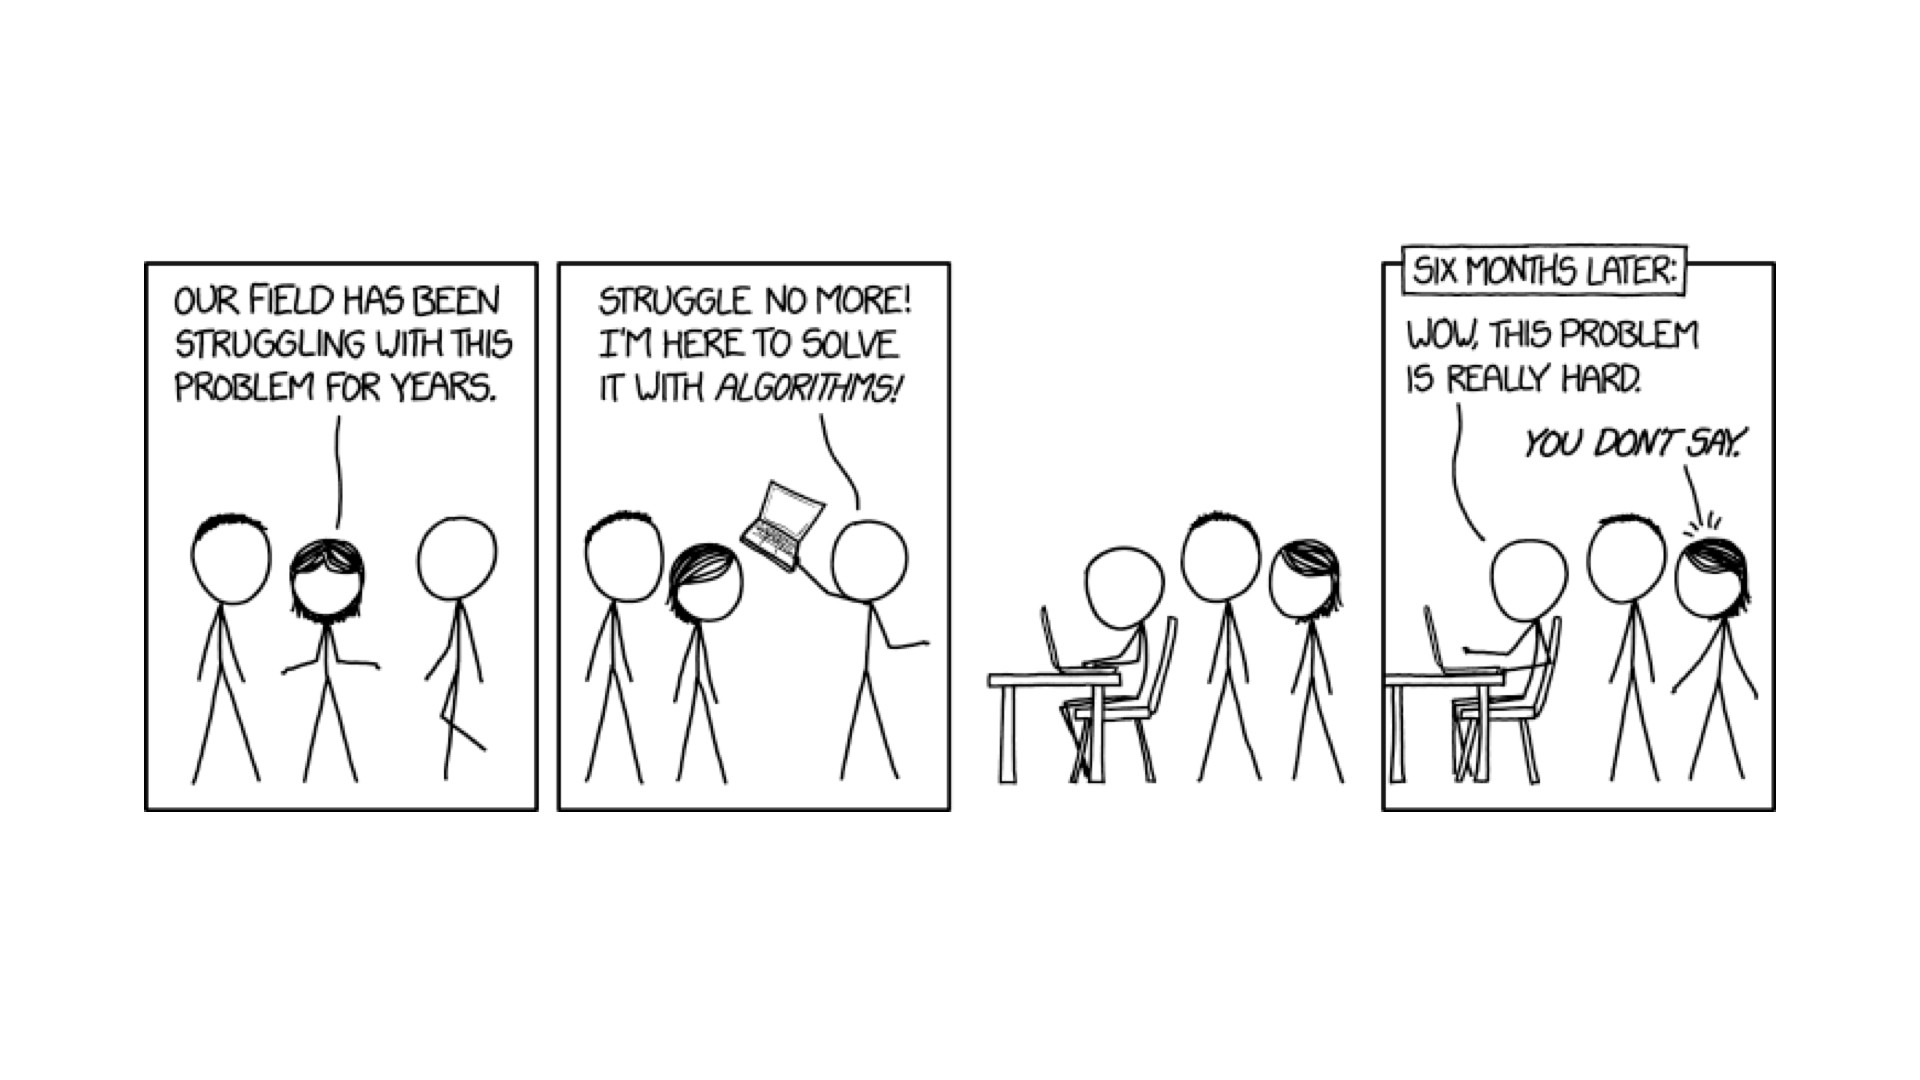 XKCD comic that portrays someone trying to fix other people's very hard problem with algorithms, just to realize that the problem was very hard.